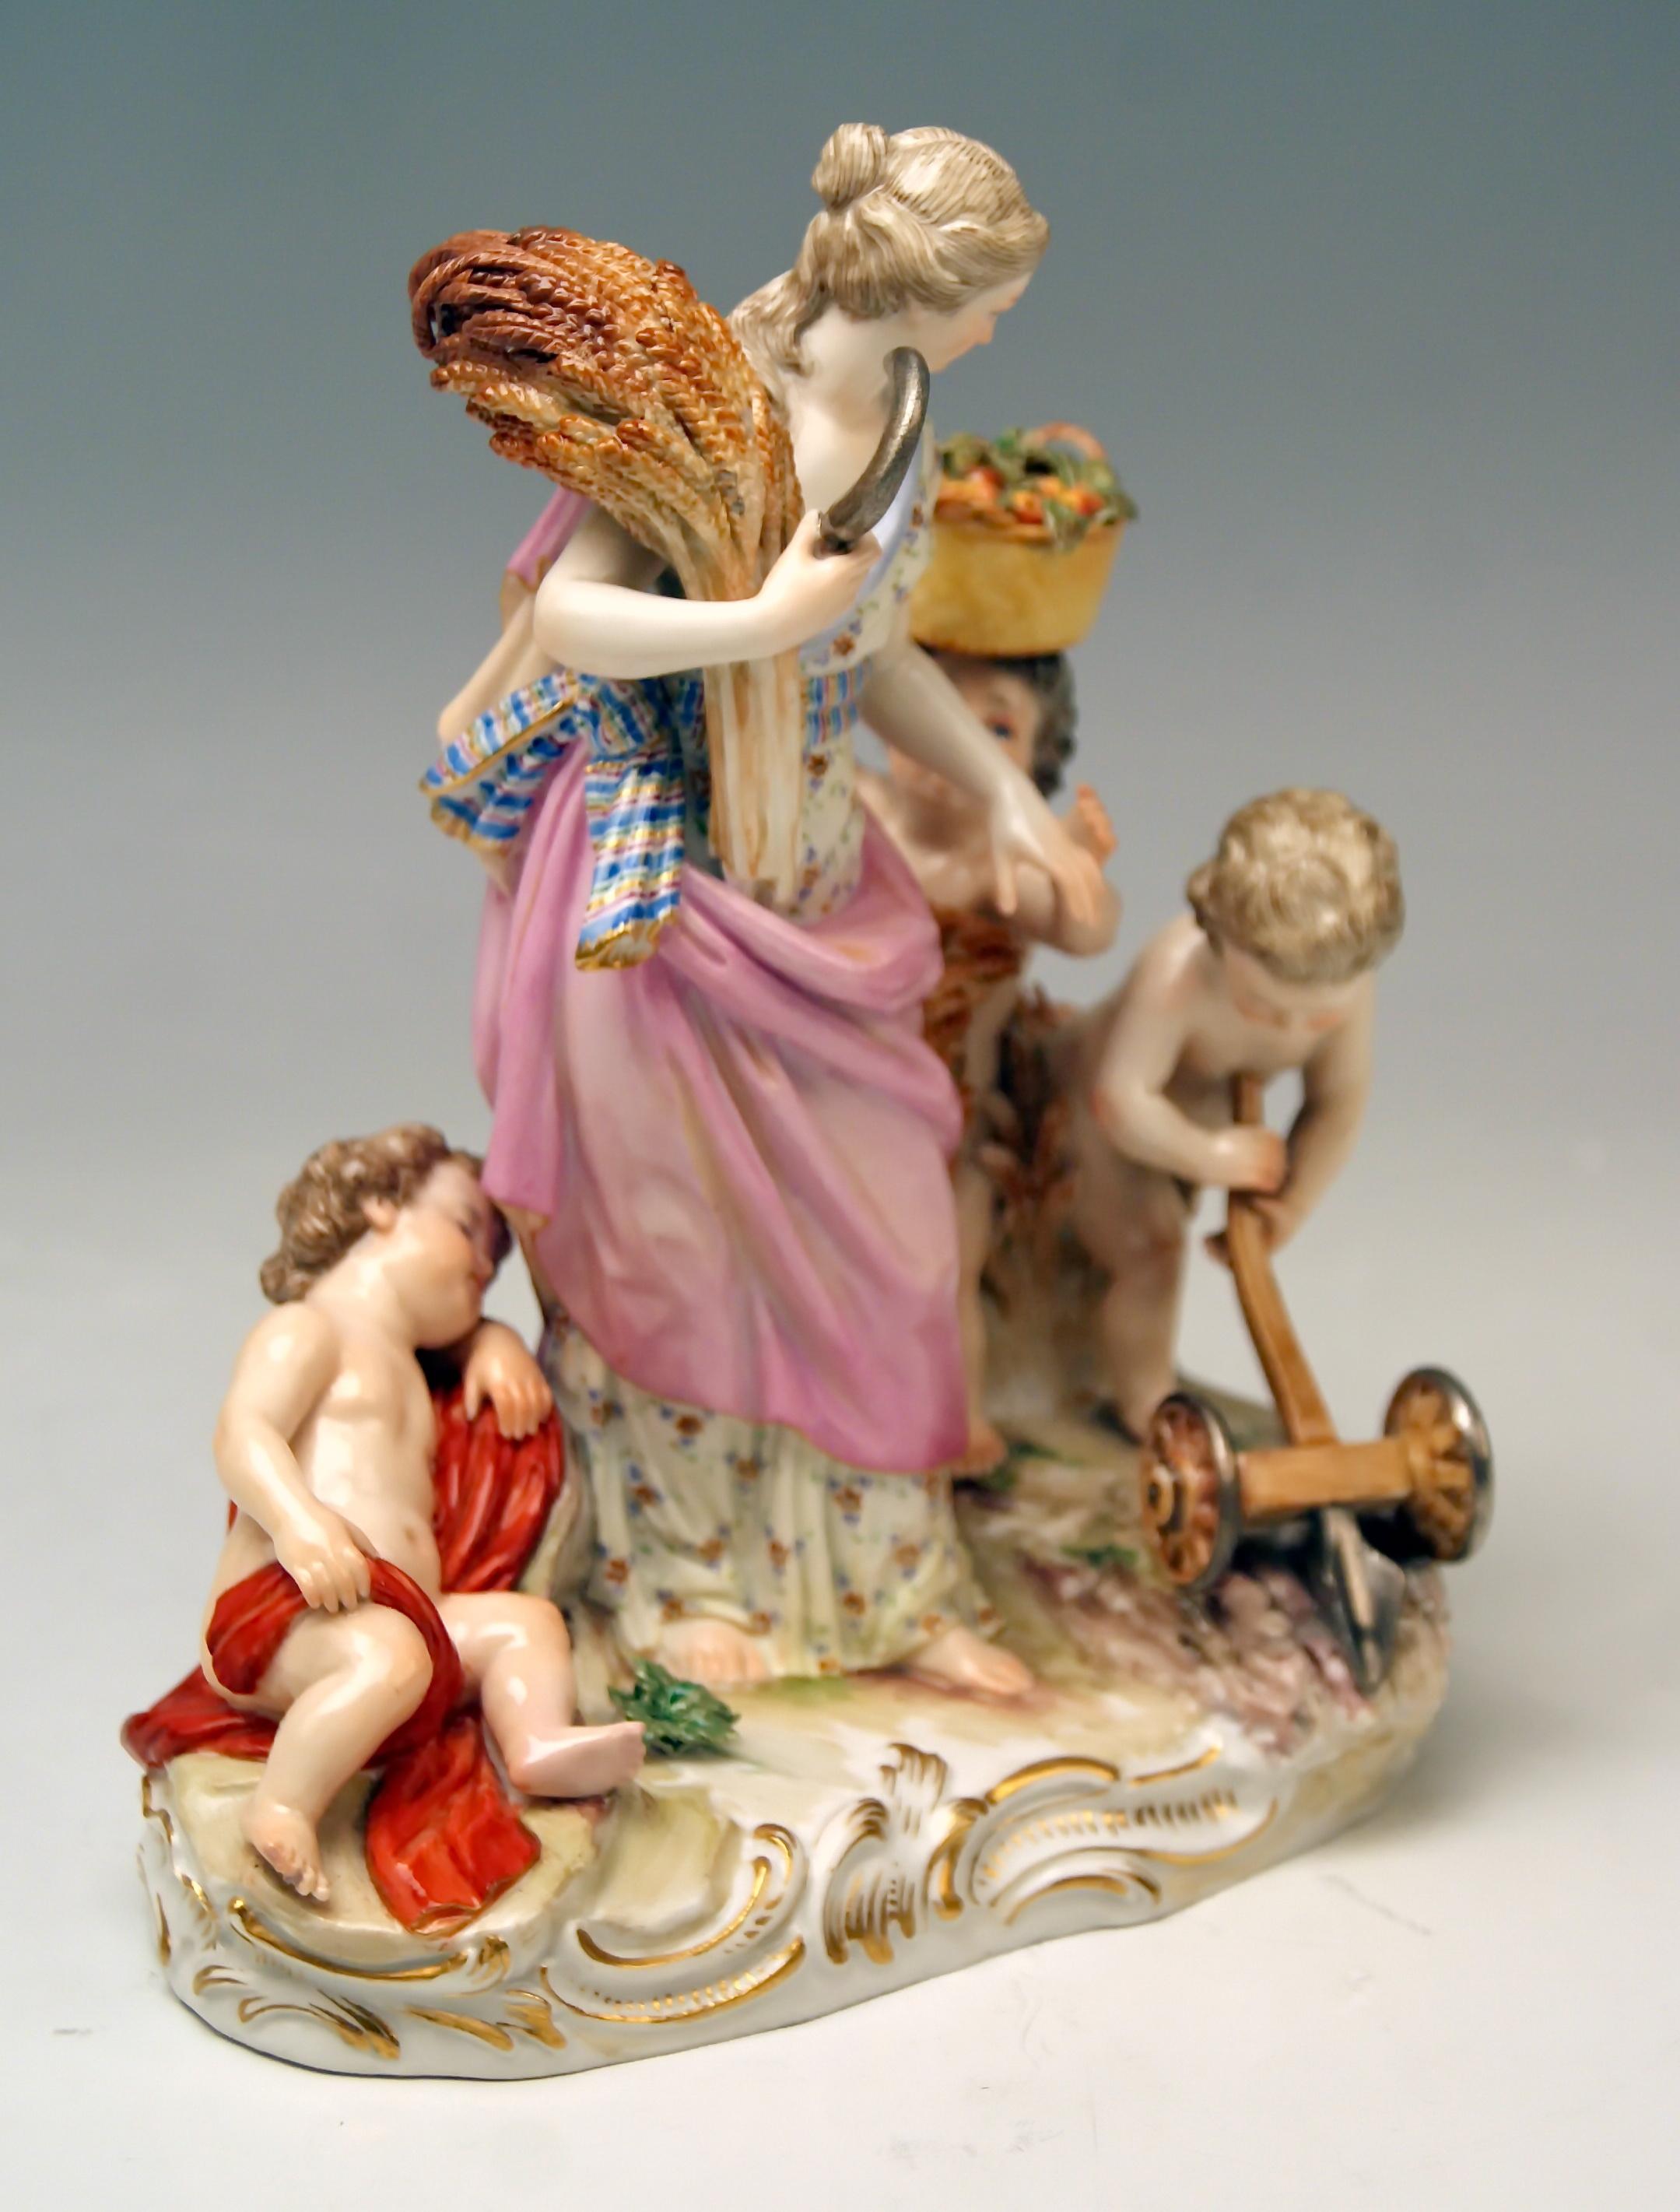 Meissen Most Remarkable Figurines
Roman Goddess Of Agriculture (= Ceres) With Three Cherubs: Allegory Of Agriculture,
designed by Michel Victor Acier (1736-1799) / modelled 1770

Size:
Height 7.28 inches / 18.5 cm
Width 5.70 inches / 14.5